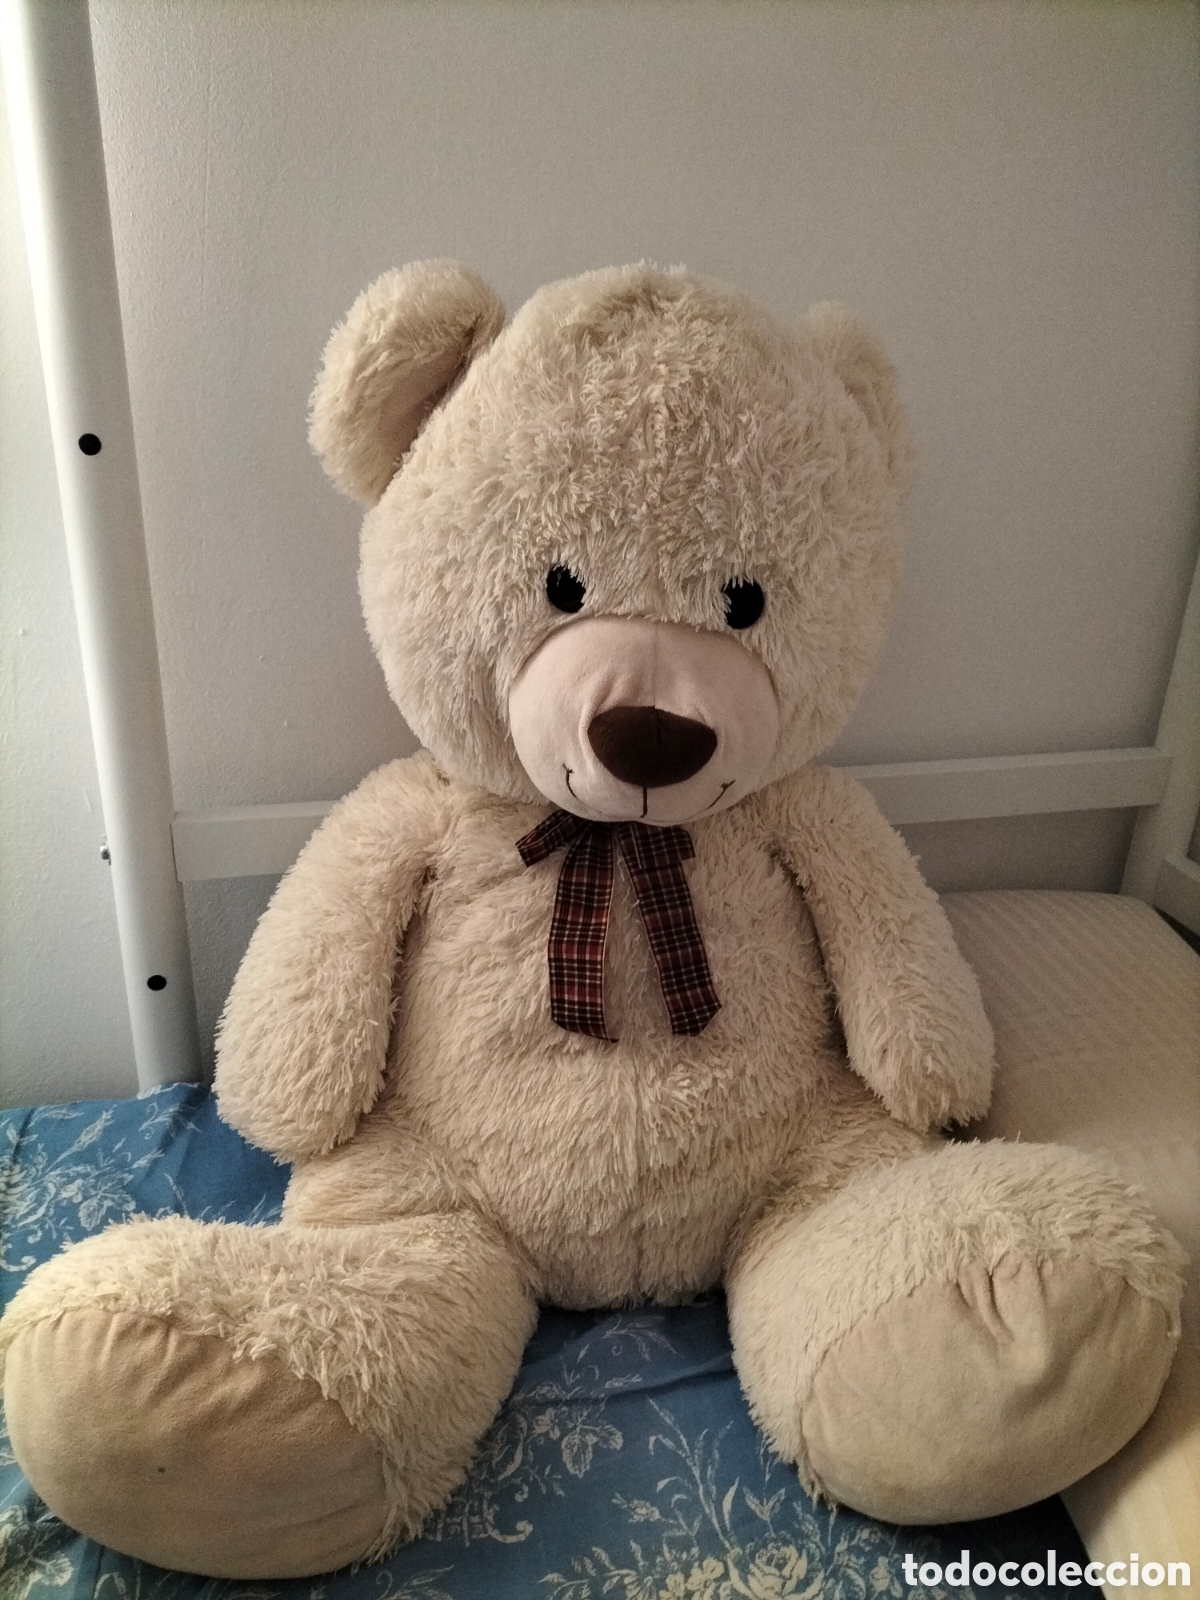 oso peluche gigante - Buy Teddy bears and other plush and soft